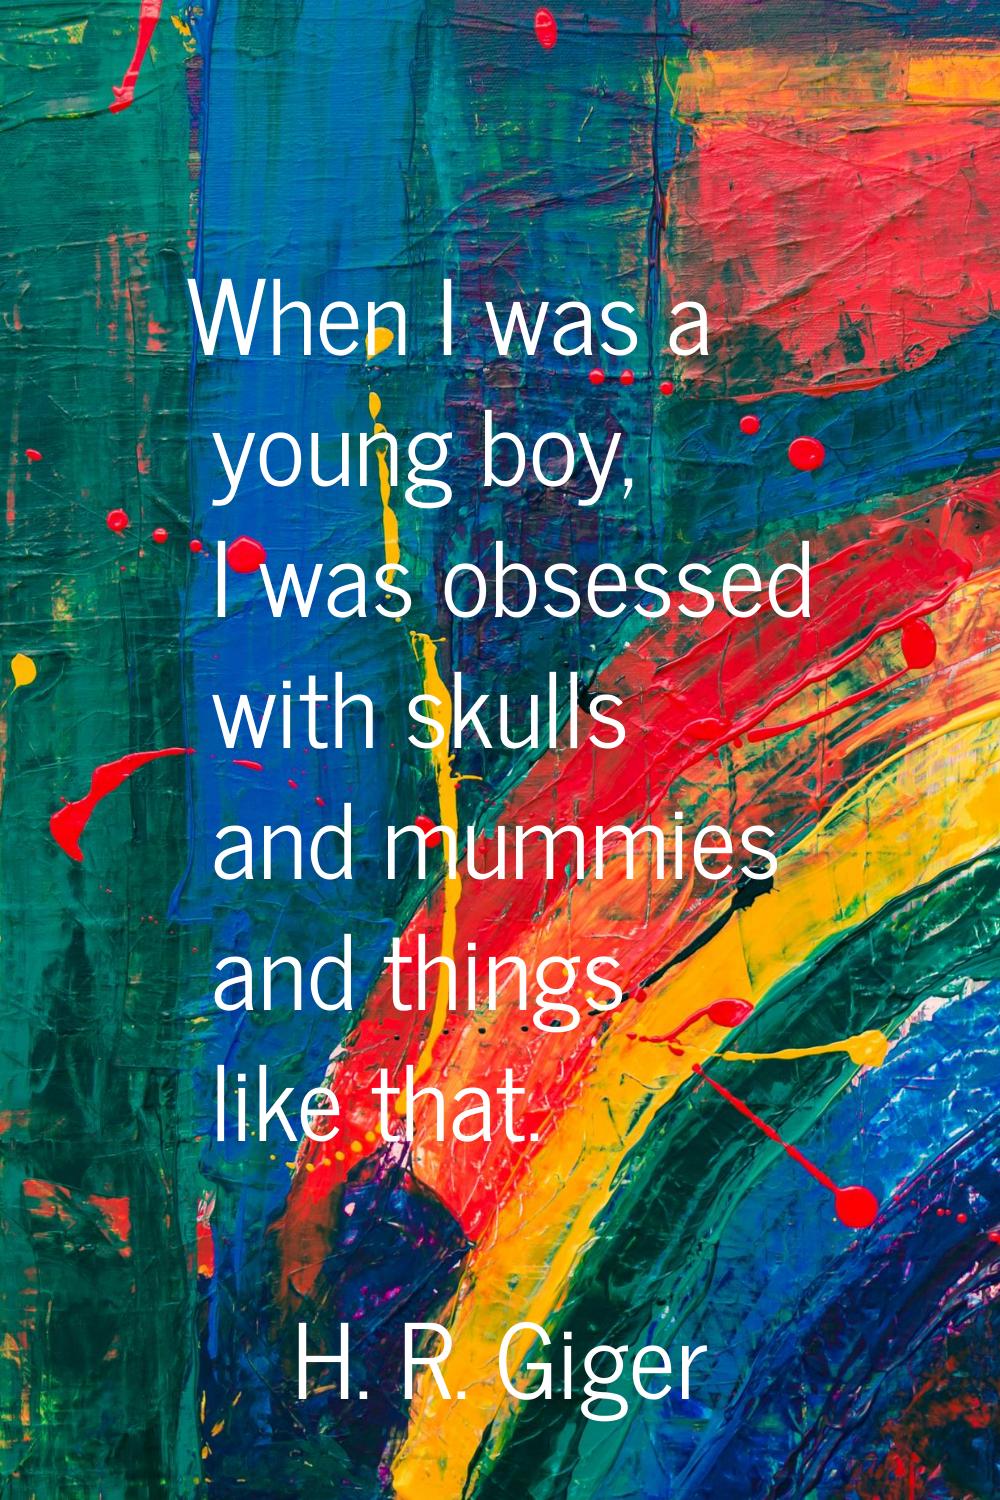 When I was a young boy, I was obsessed with skulls and mummies and things like that.